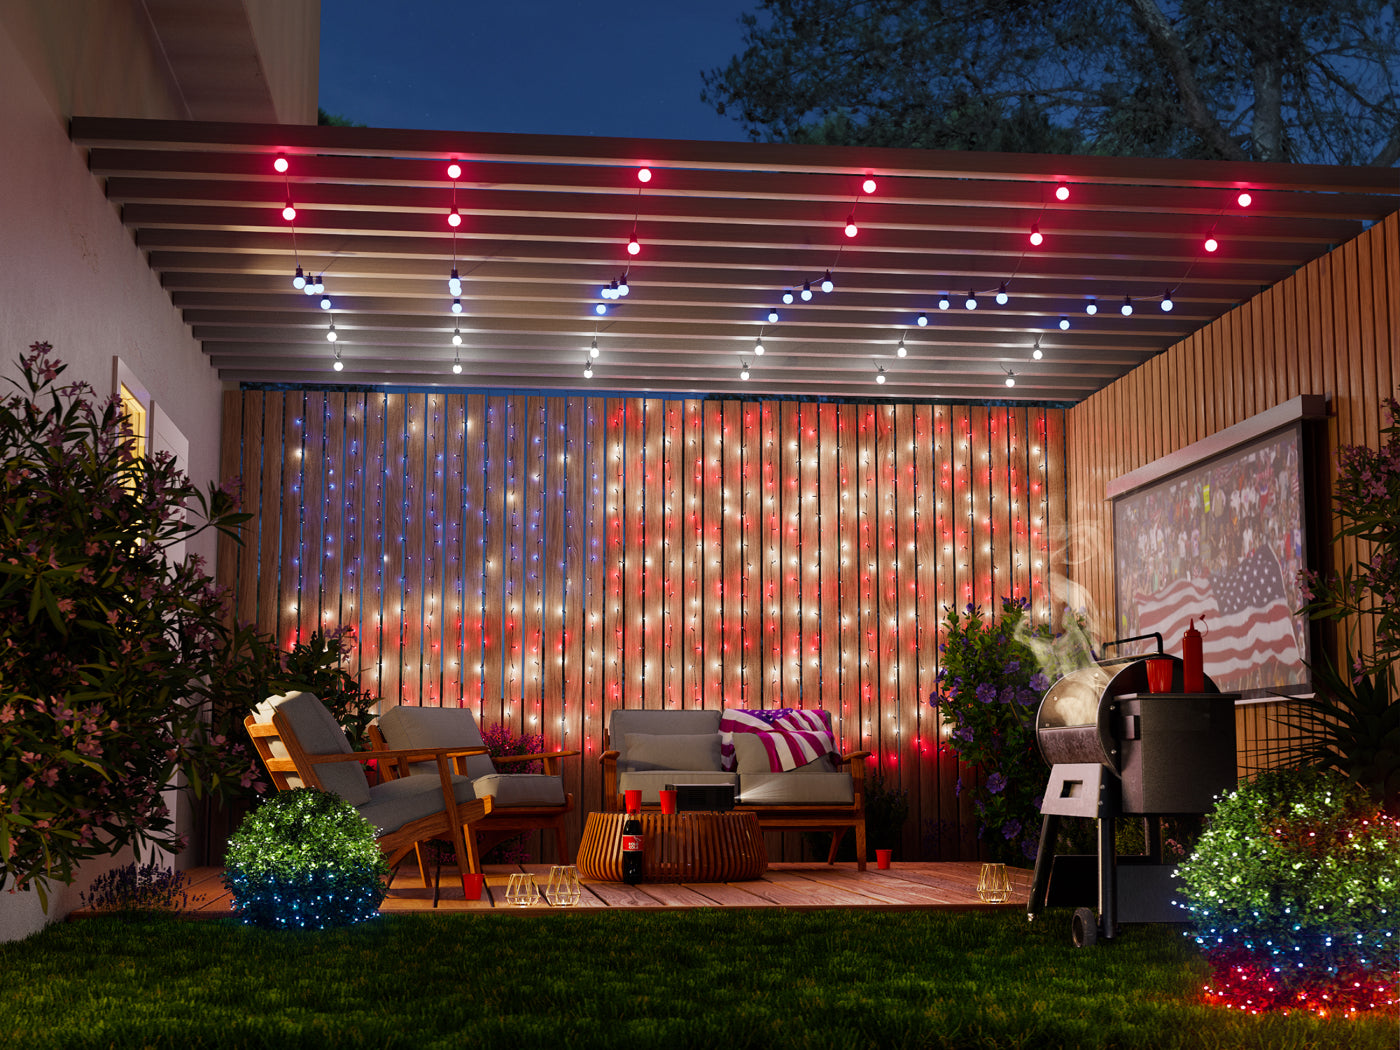 Design a spectacular light show for Independence Day